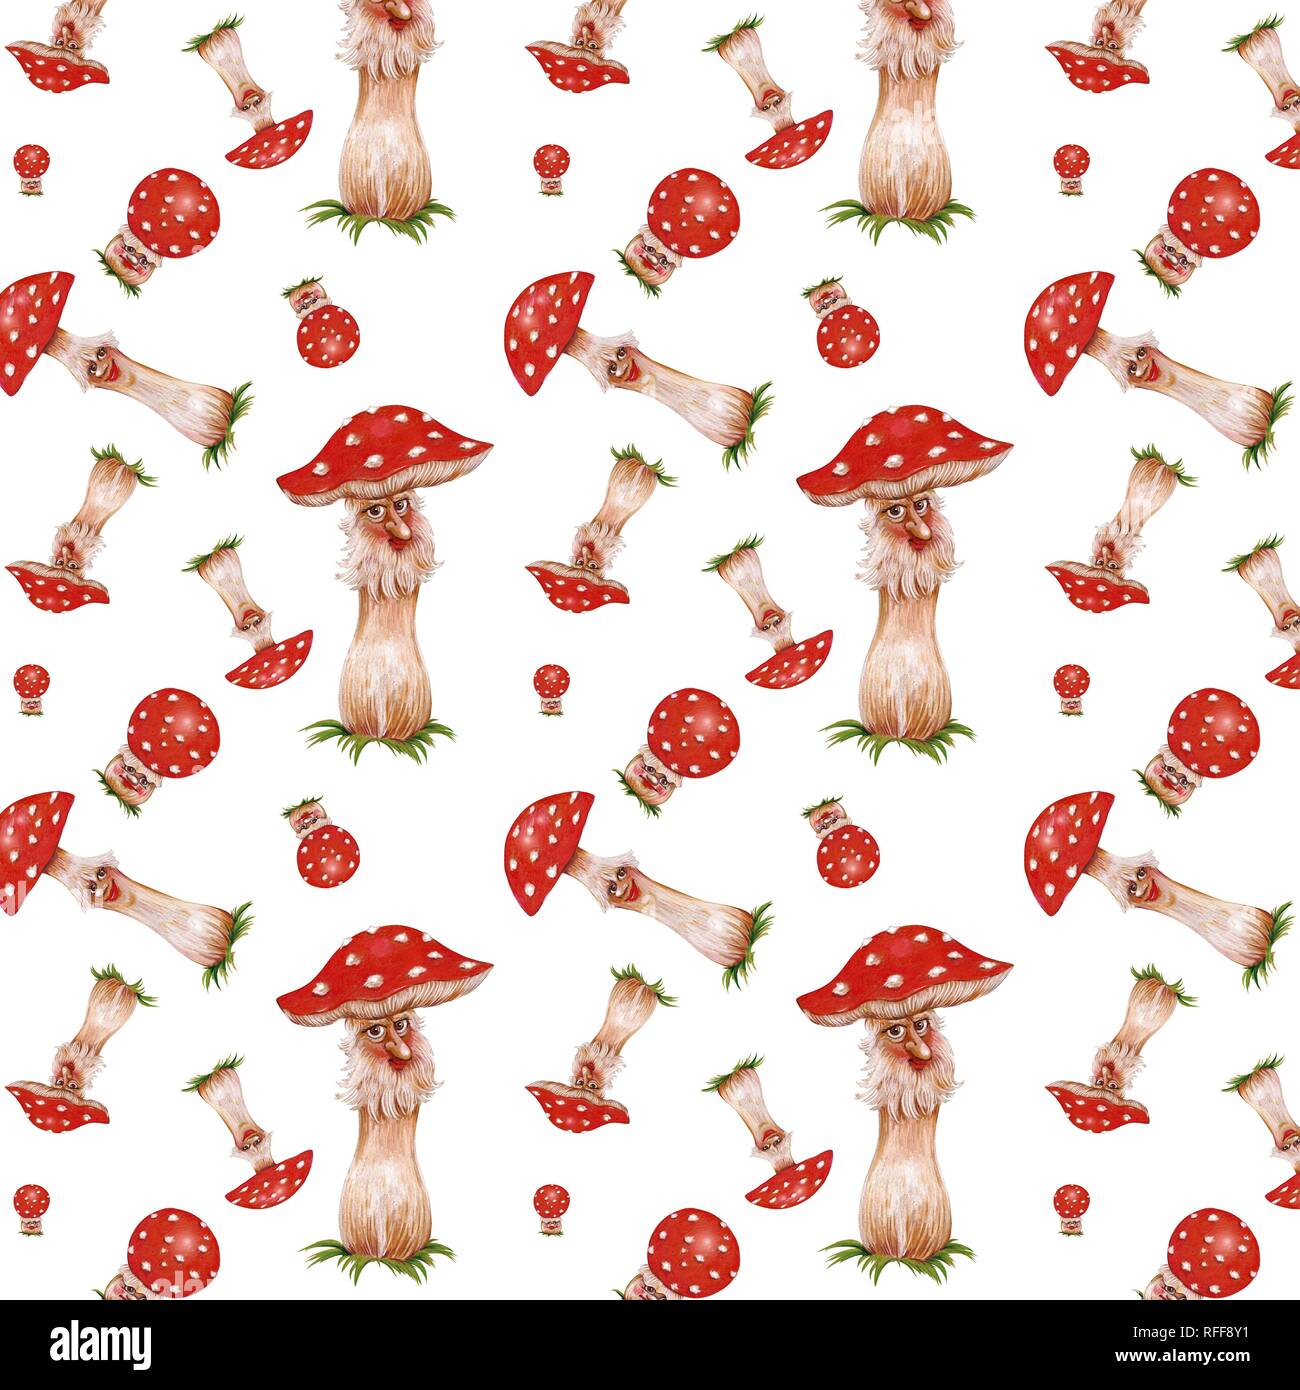 Wallpaper, wrapping paper, seamless pattern, fly agarics, mushroom family, clipping, background white, Germany Stock Photo